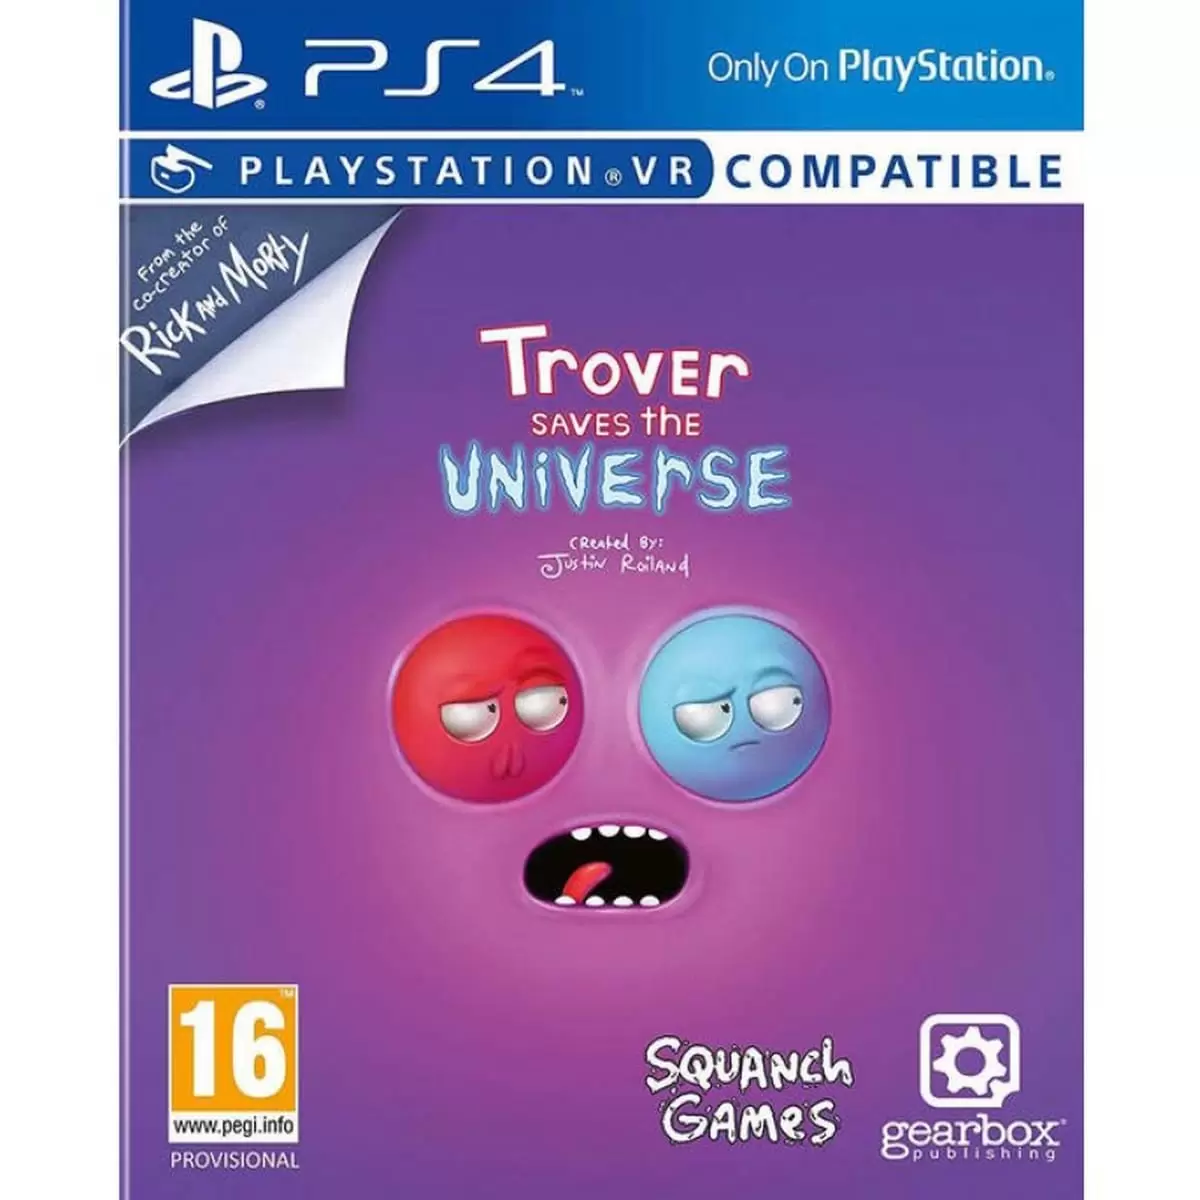 PS4 Games - Trover Saves The Universe